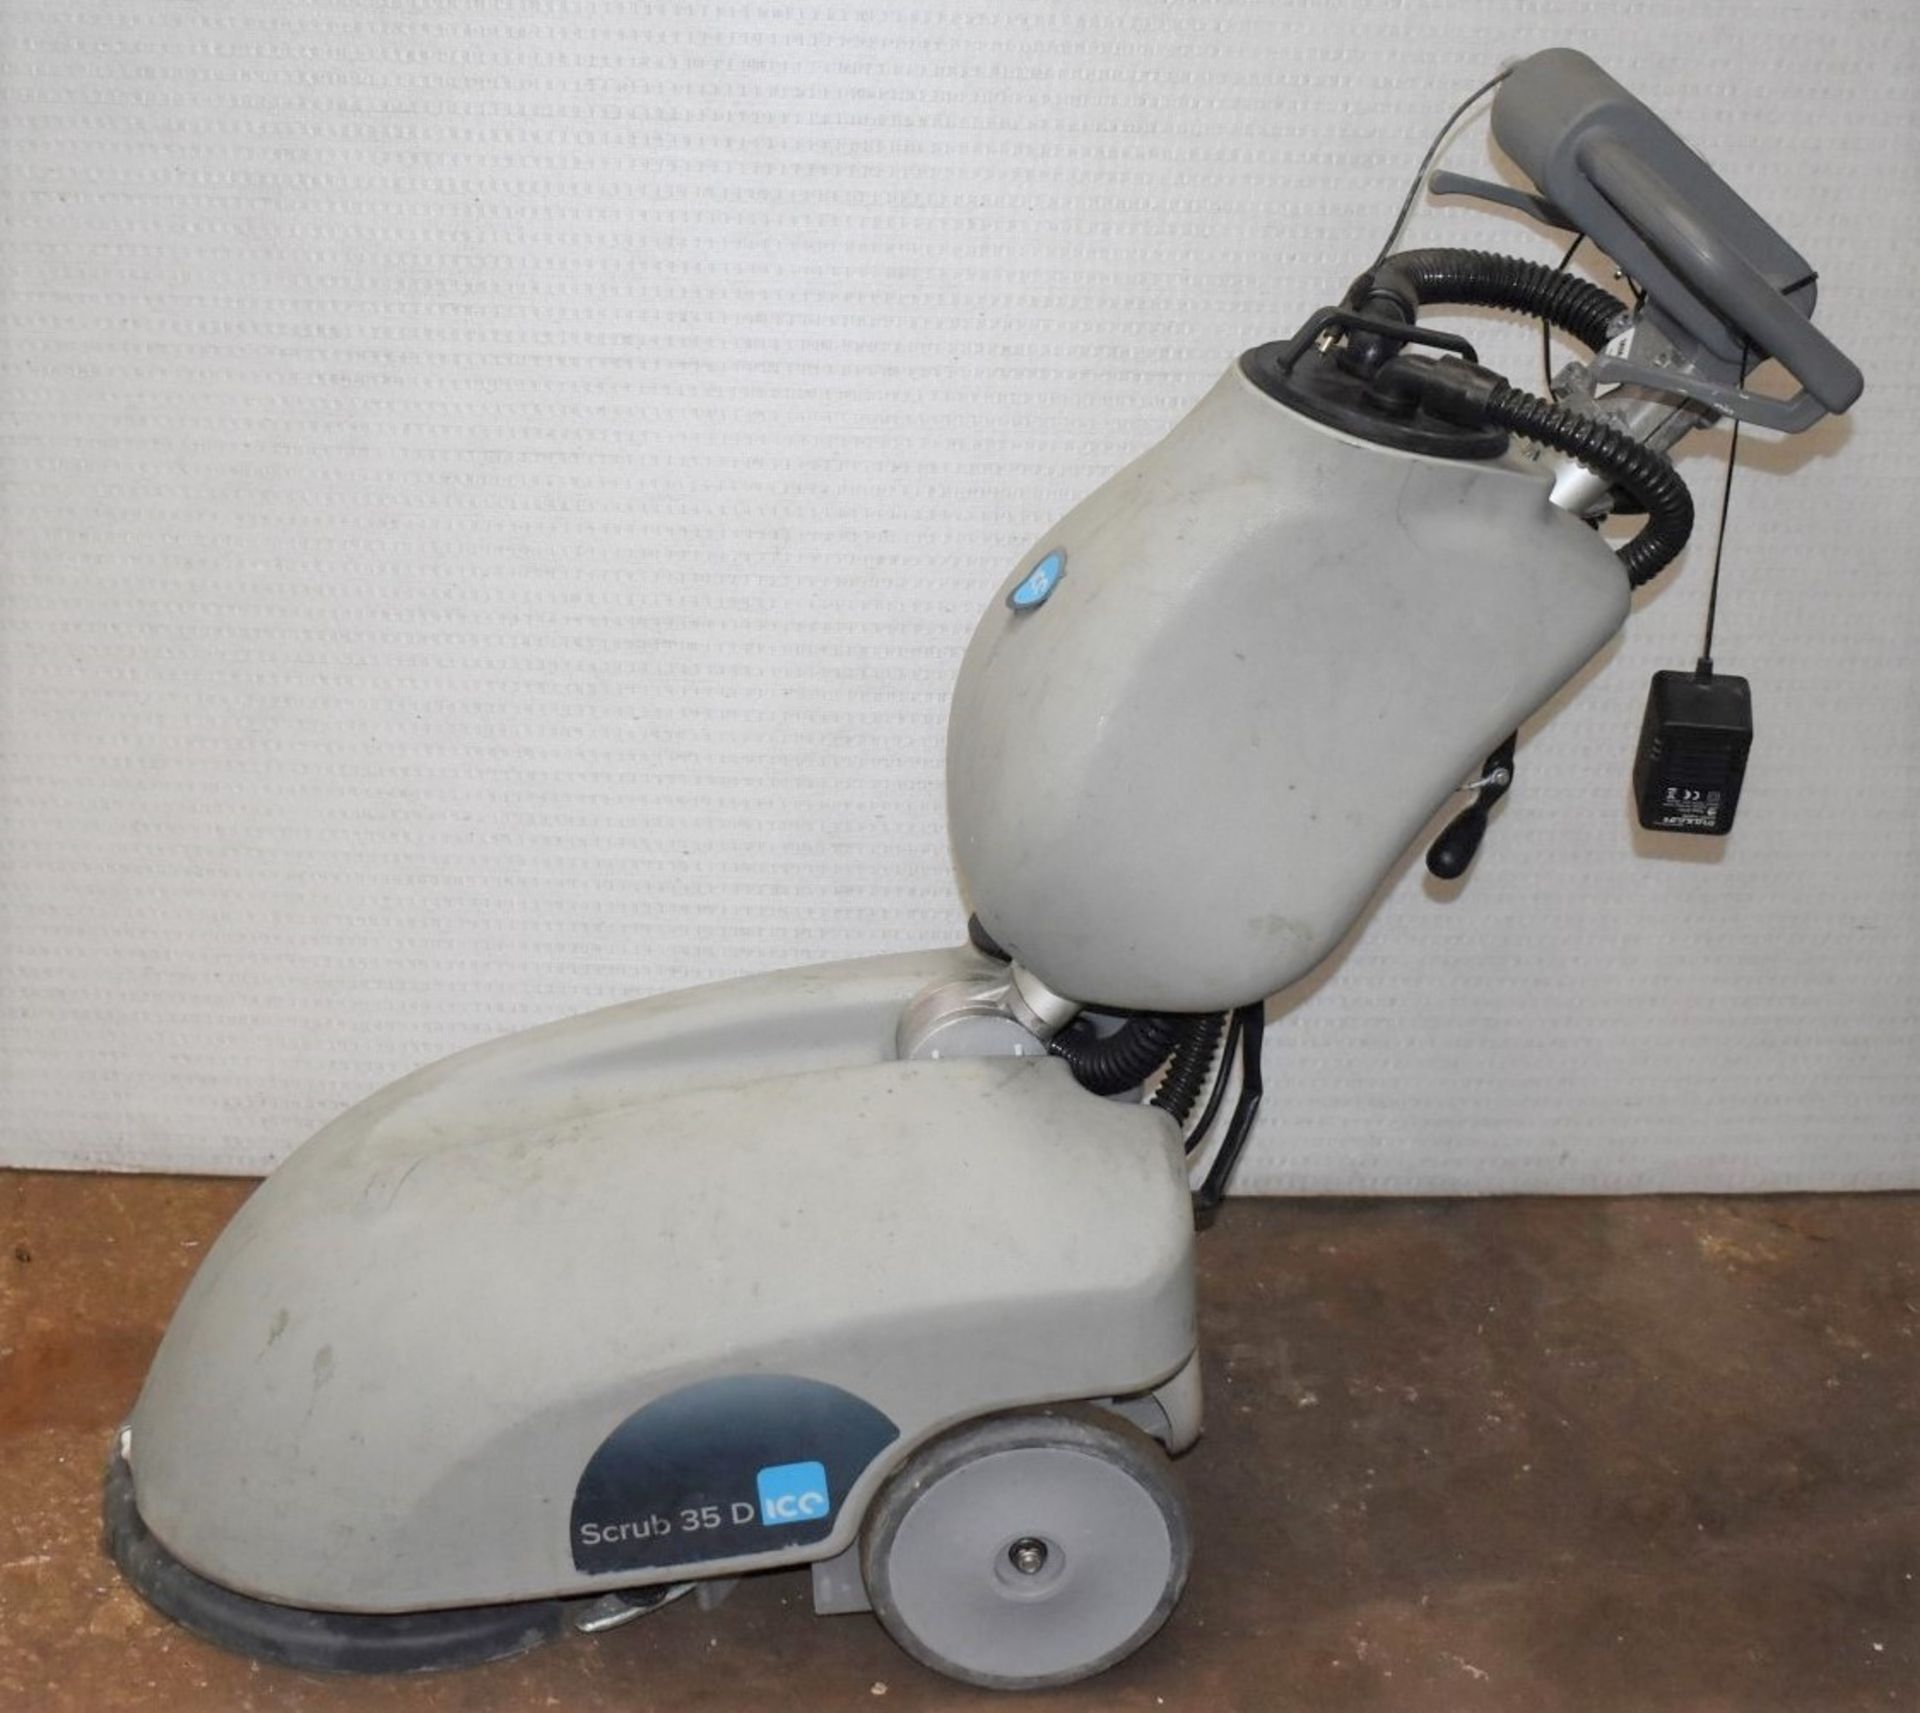 1 x Ice Scrub 35D Compact Floor Scrubber - Recently Removed From a Supermarket Environment Due to - Image 15 of 15